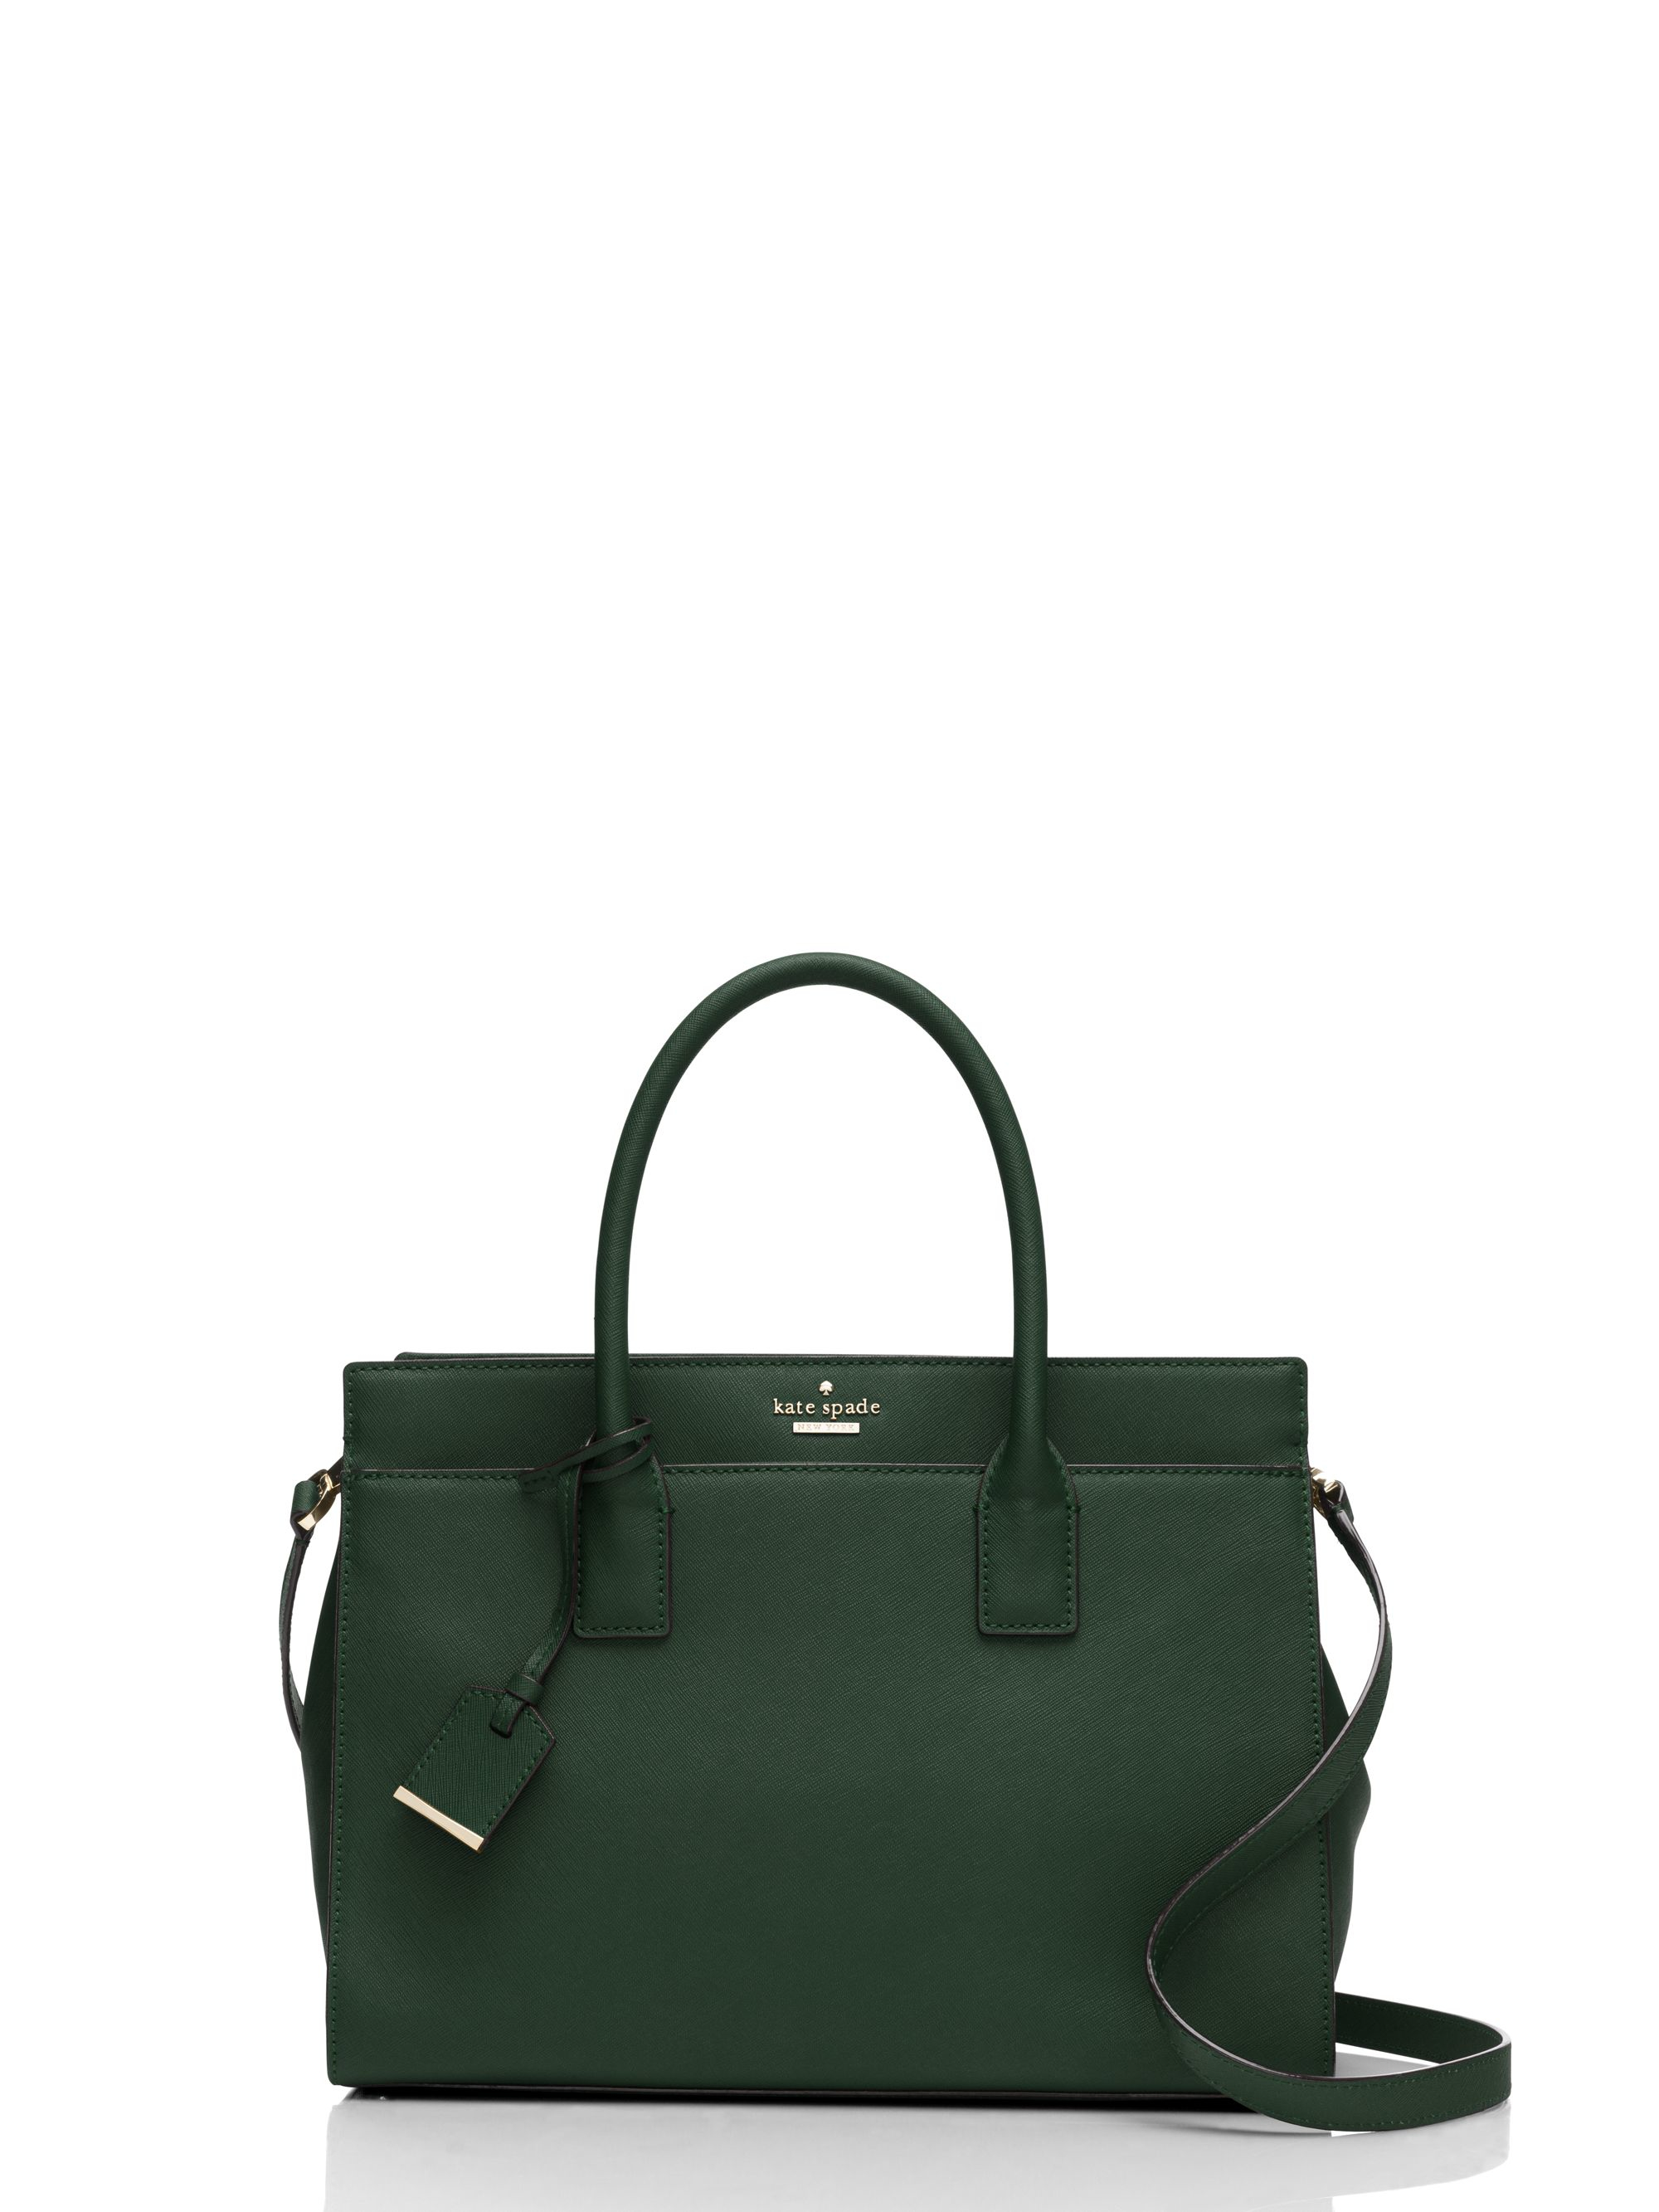 Kate spade new york Cameron Street Candace Satchel in Green | Lyst